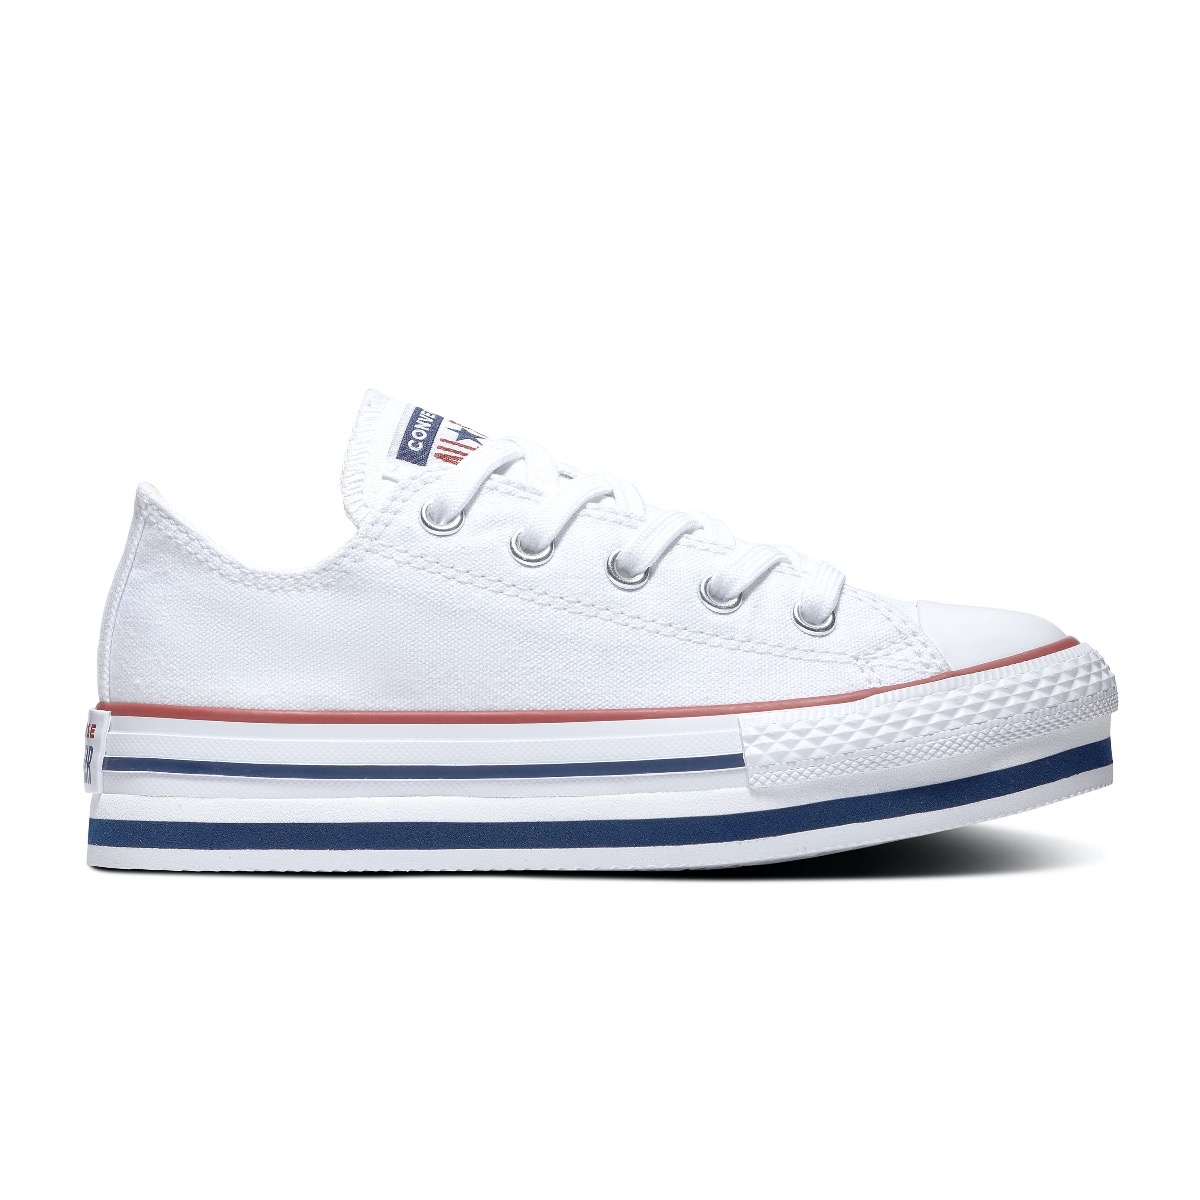 Converse Chuck Taylor All Star Platform Layer sneakers wit-blauw-rood